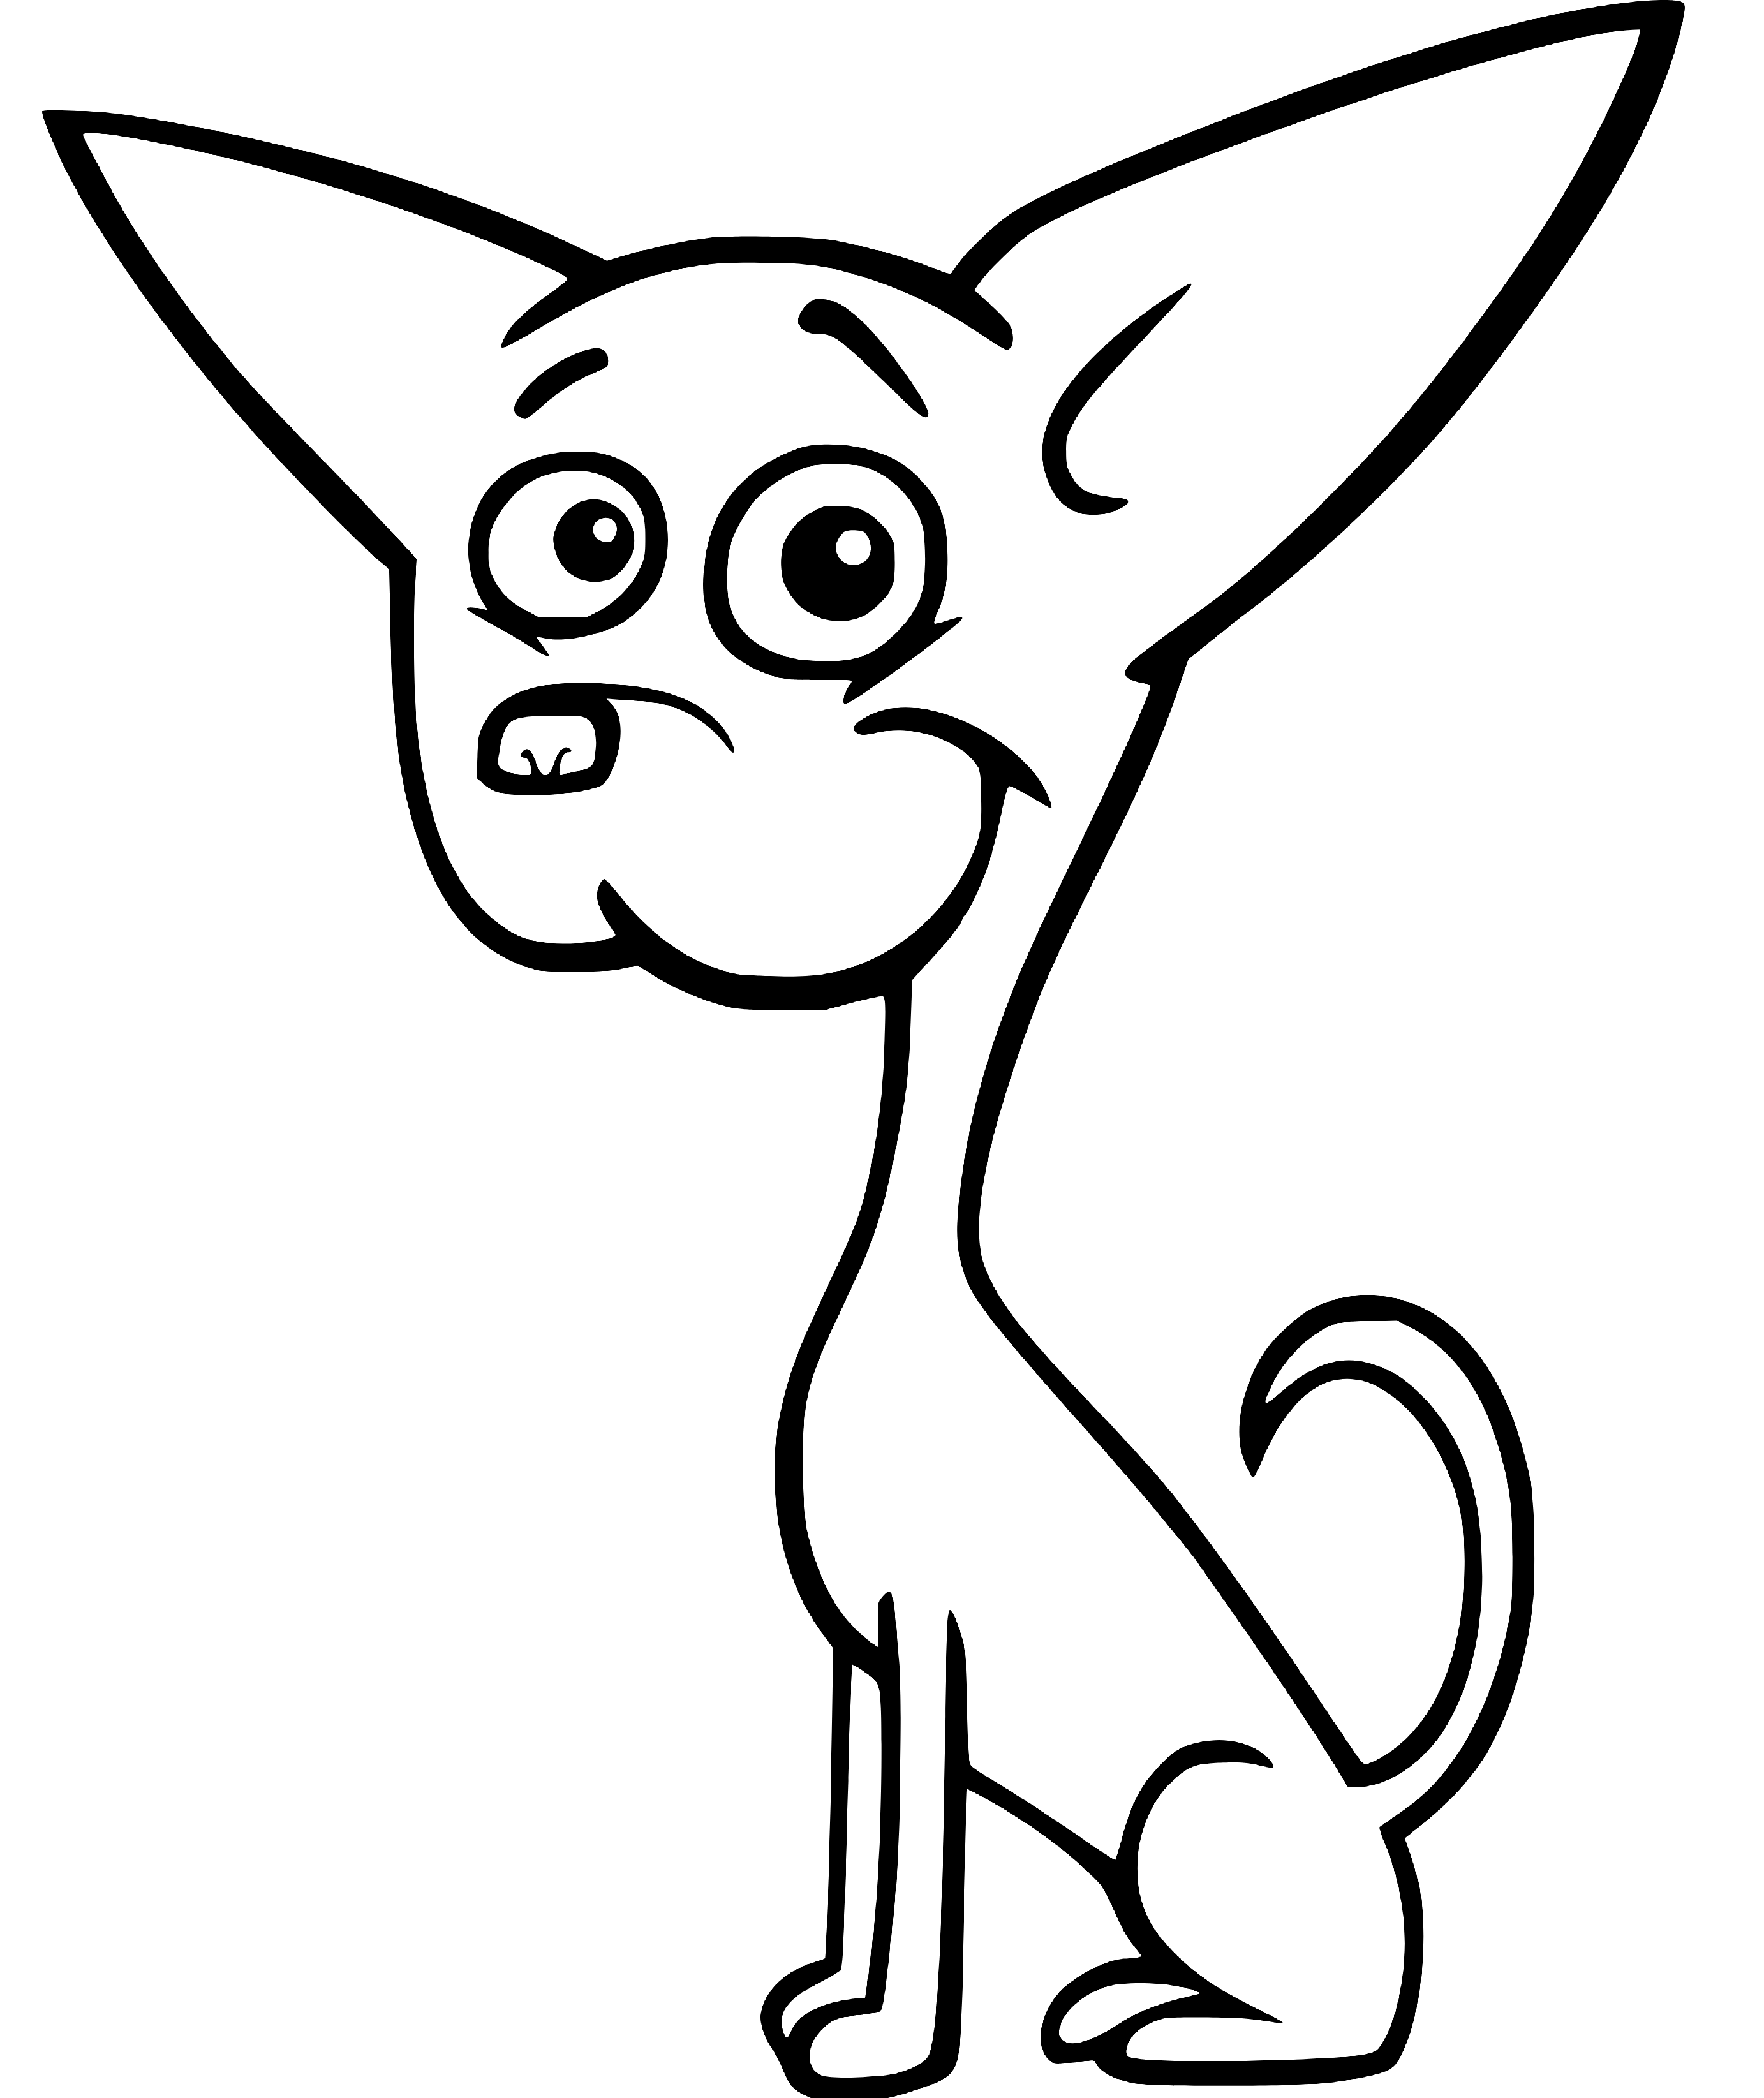 Printable Tiny Puppy Coloring Page for kids.